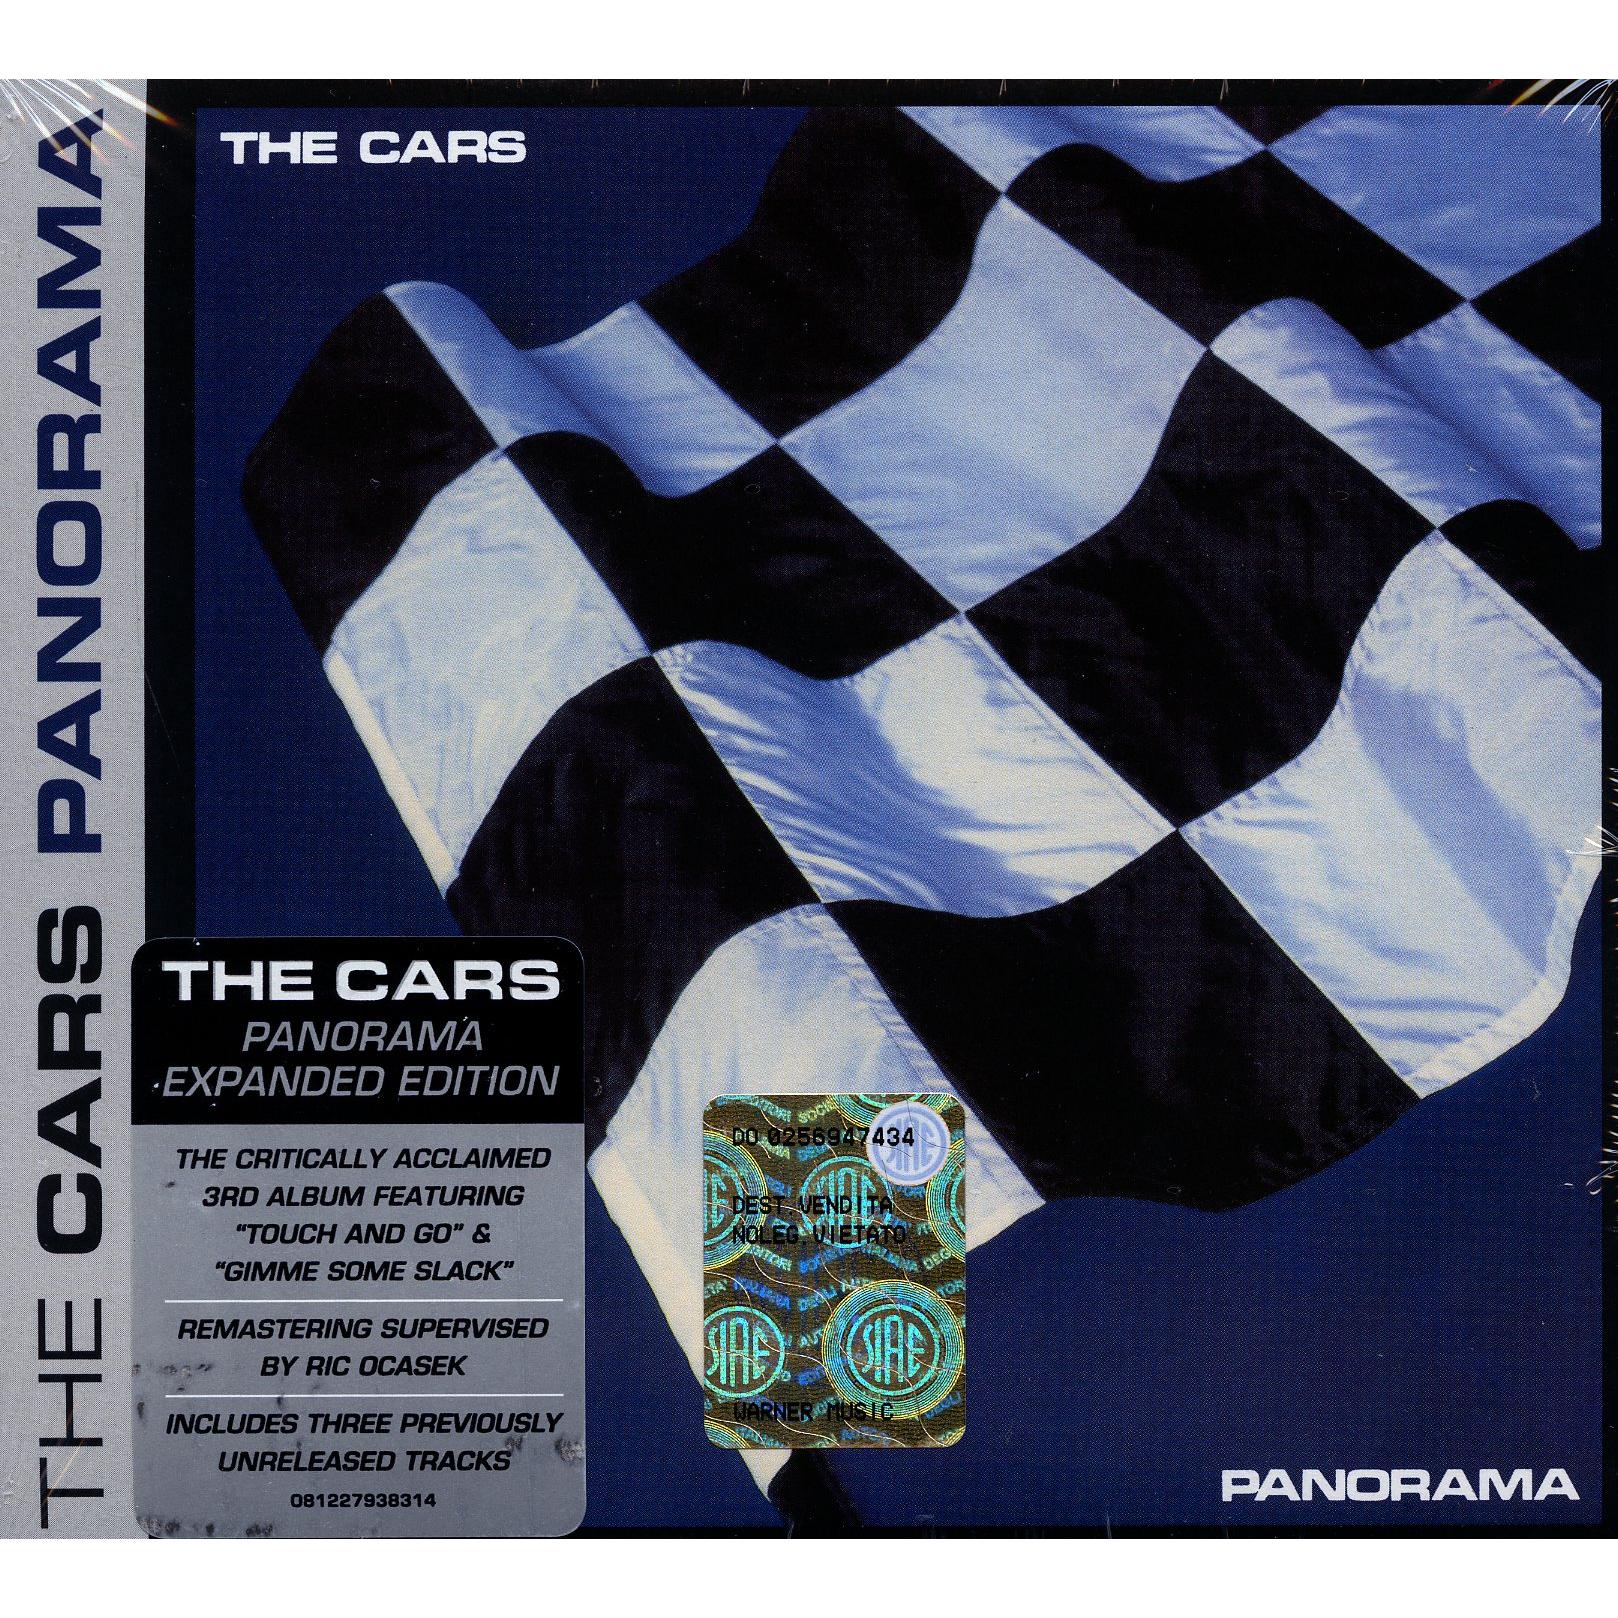 PANORAMA (EXPANDED EDITION)